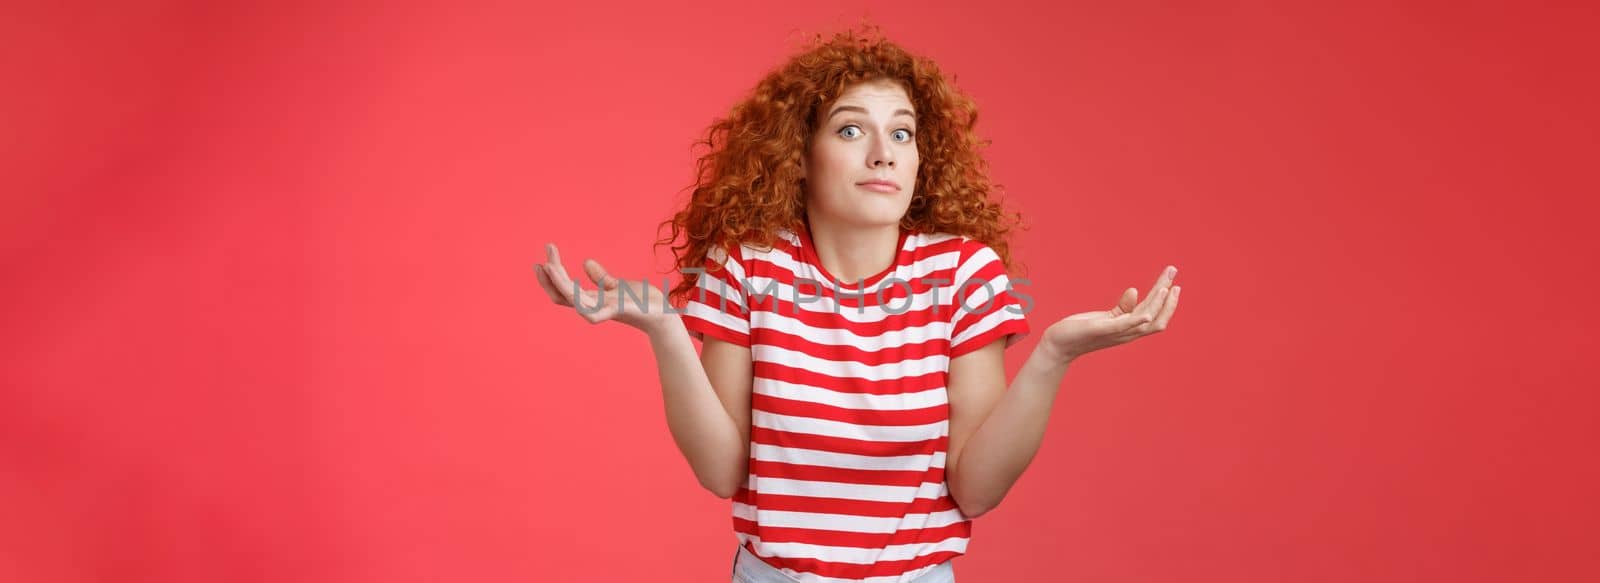 Not know ask someone else. Clueless unaware cute redhead curly-haired charming modern girl uncertain where spend summer holidays shrugging hands spread sideways smirking confused red background.